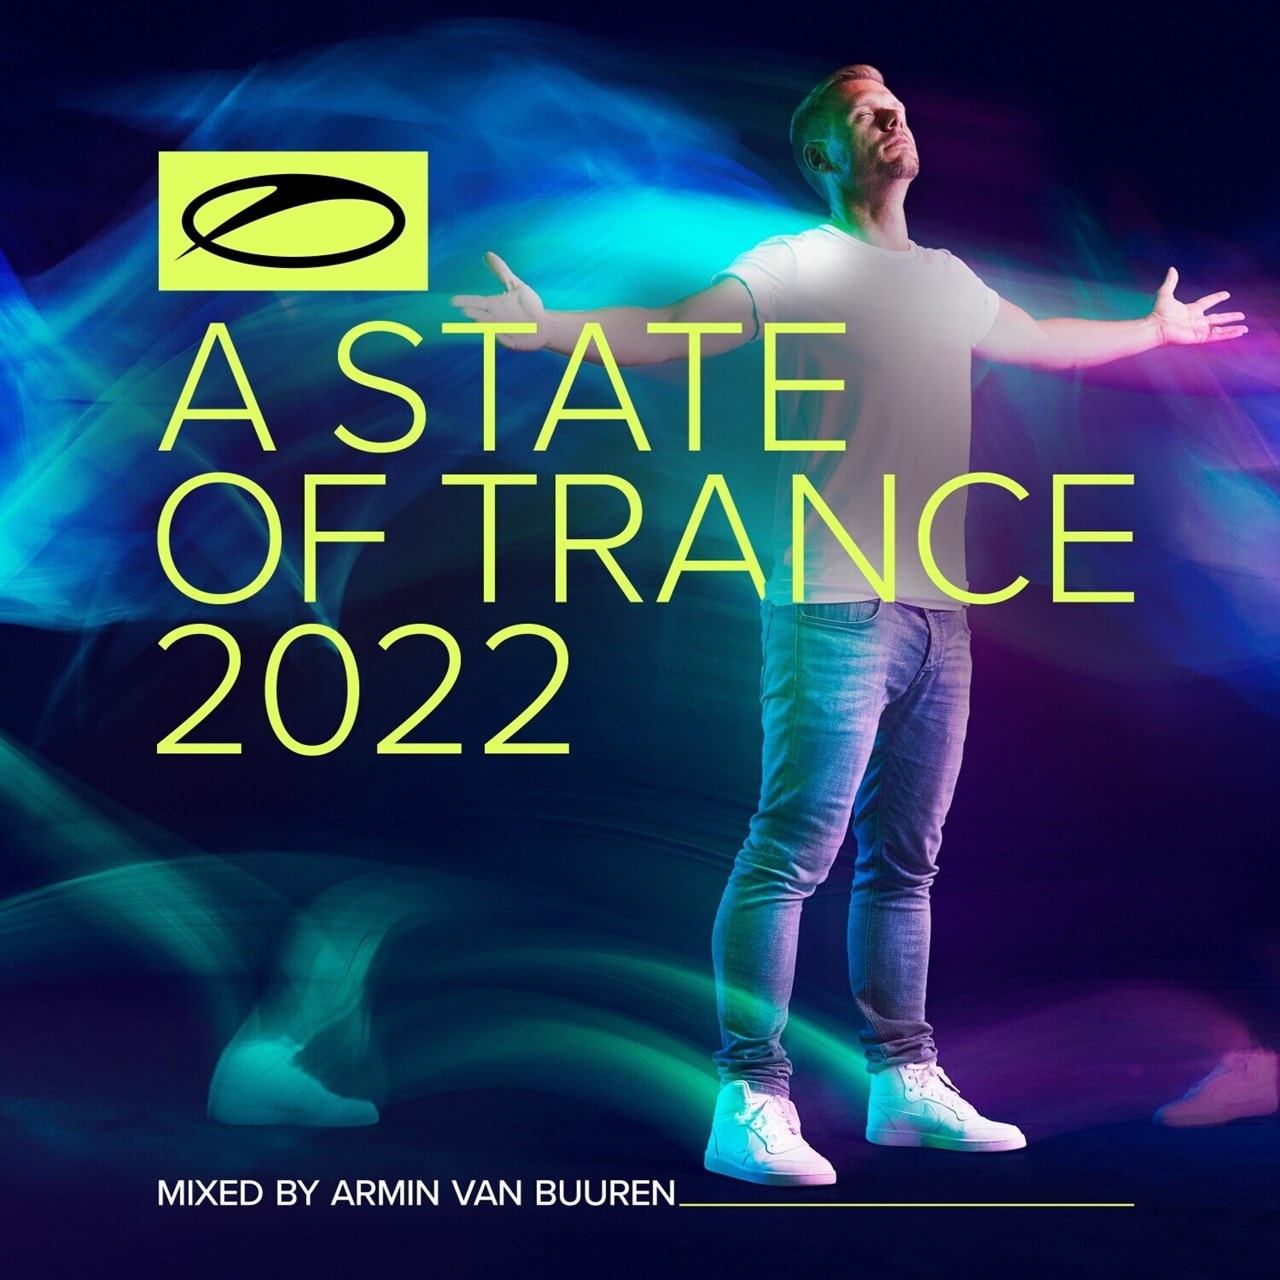 A State of Trance 2022 Mixed By Armin Van Buuren CD Album Free